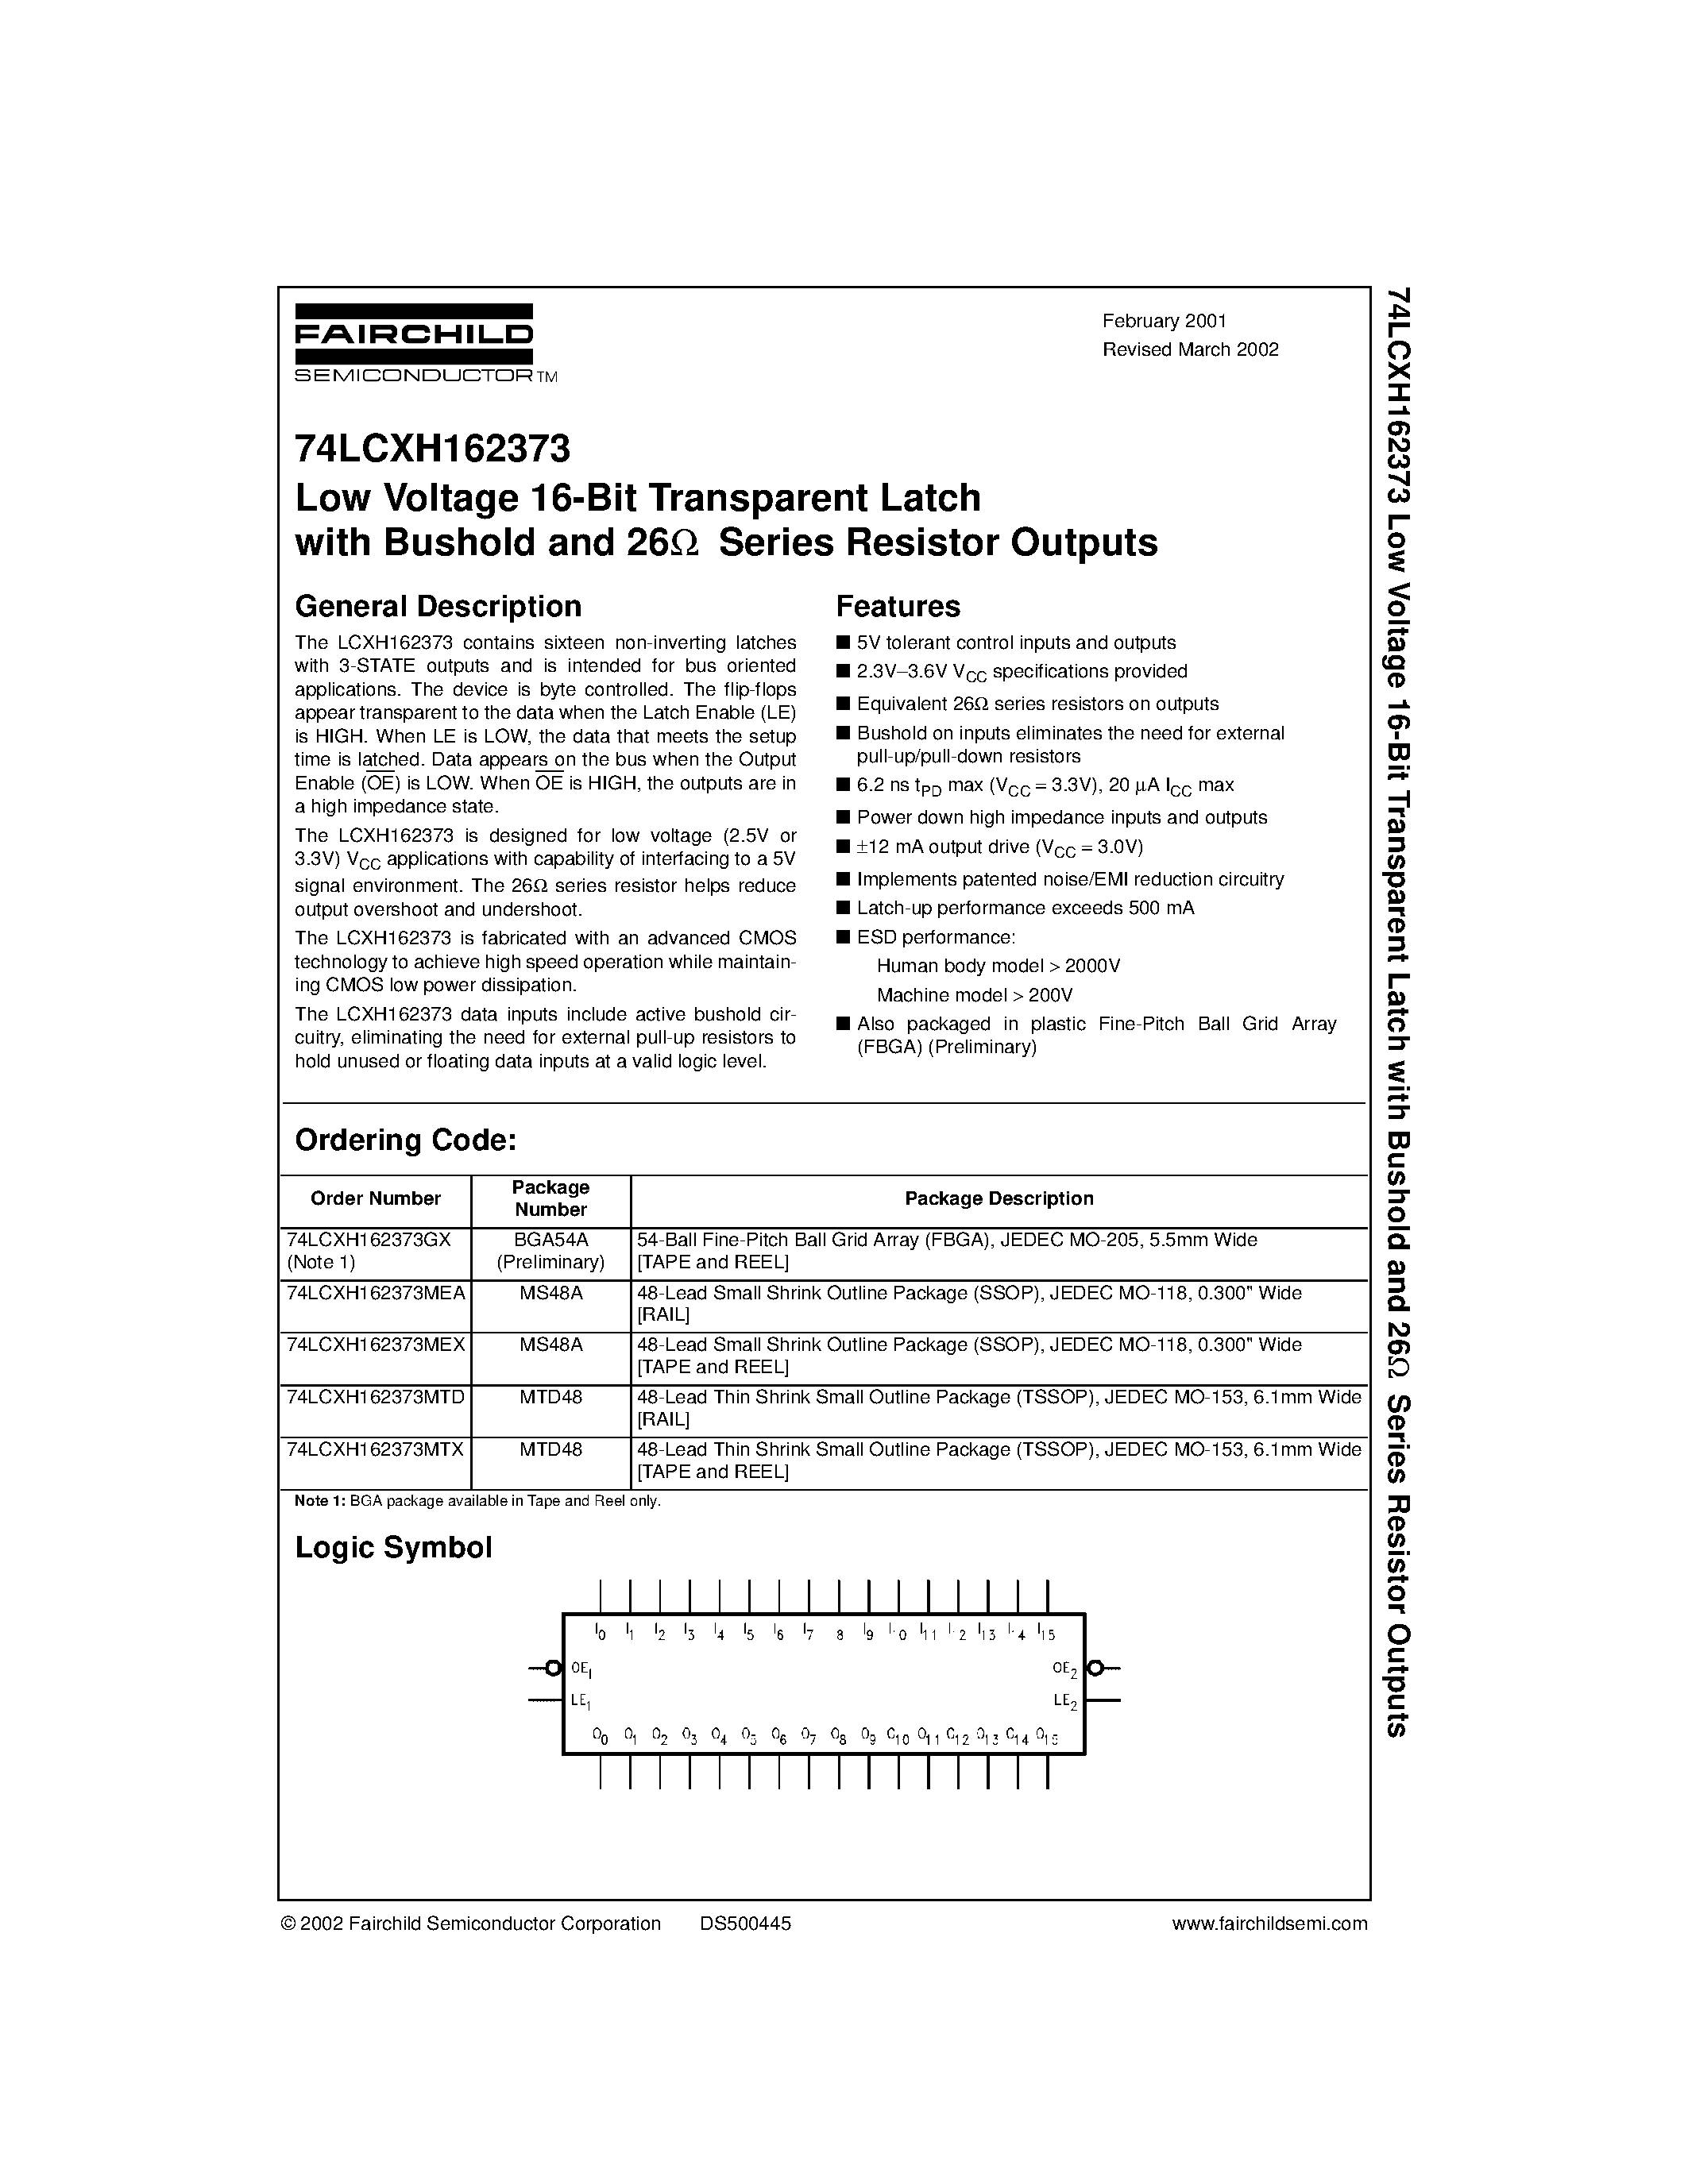 Datasheet 74LCXH162373MEX - Low Voltage 16-Bit Transparent Latch with Bushold and 26 Series Resistor Outputs page 1